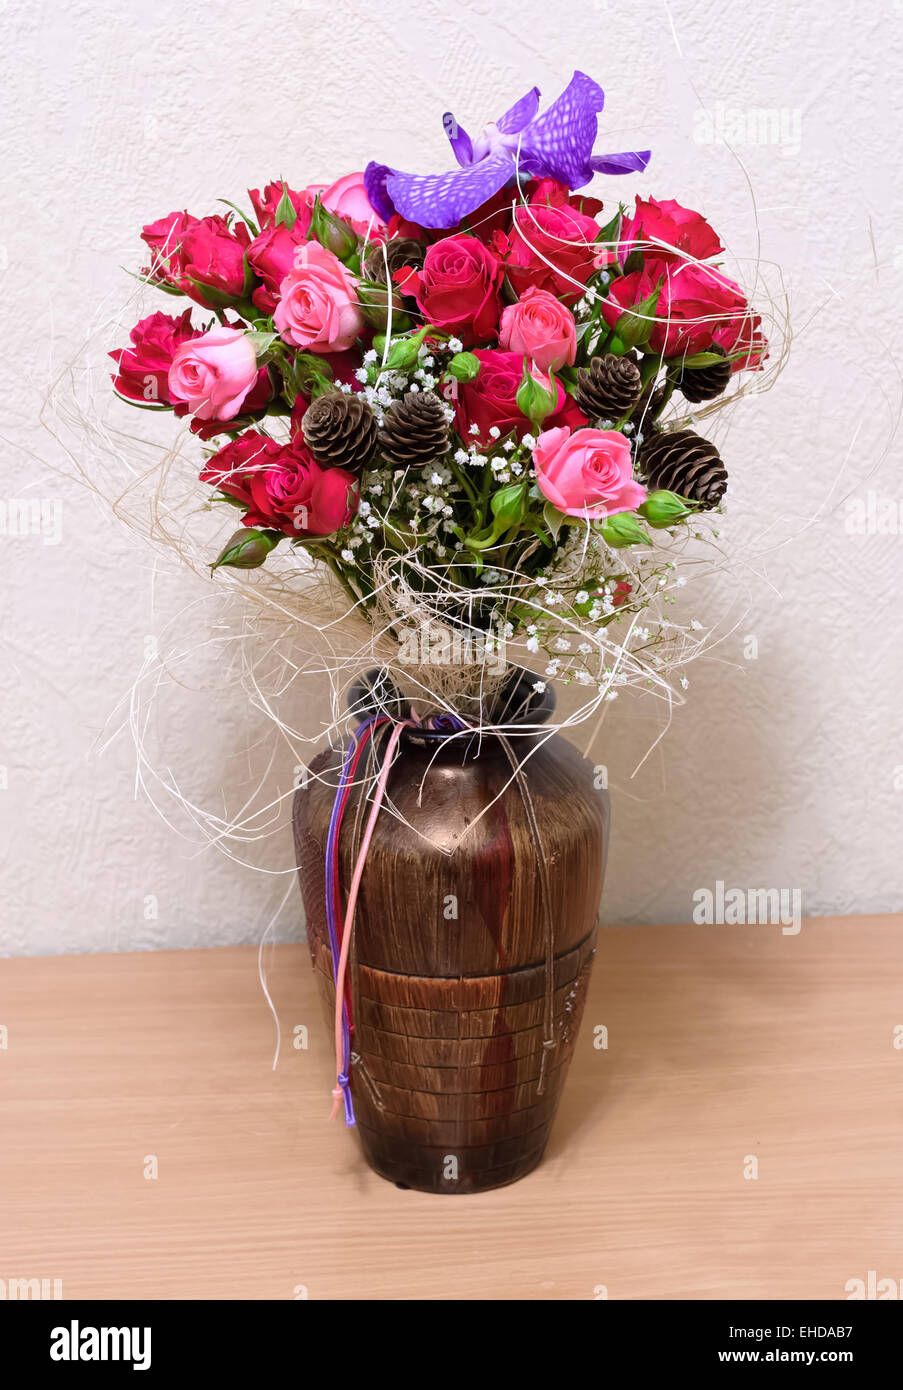 Vase with flowers. Floral arrangement with roses and orchid Vanda Stock Photo